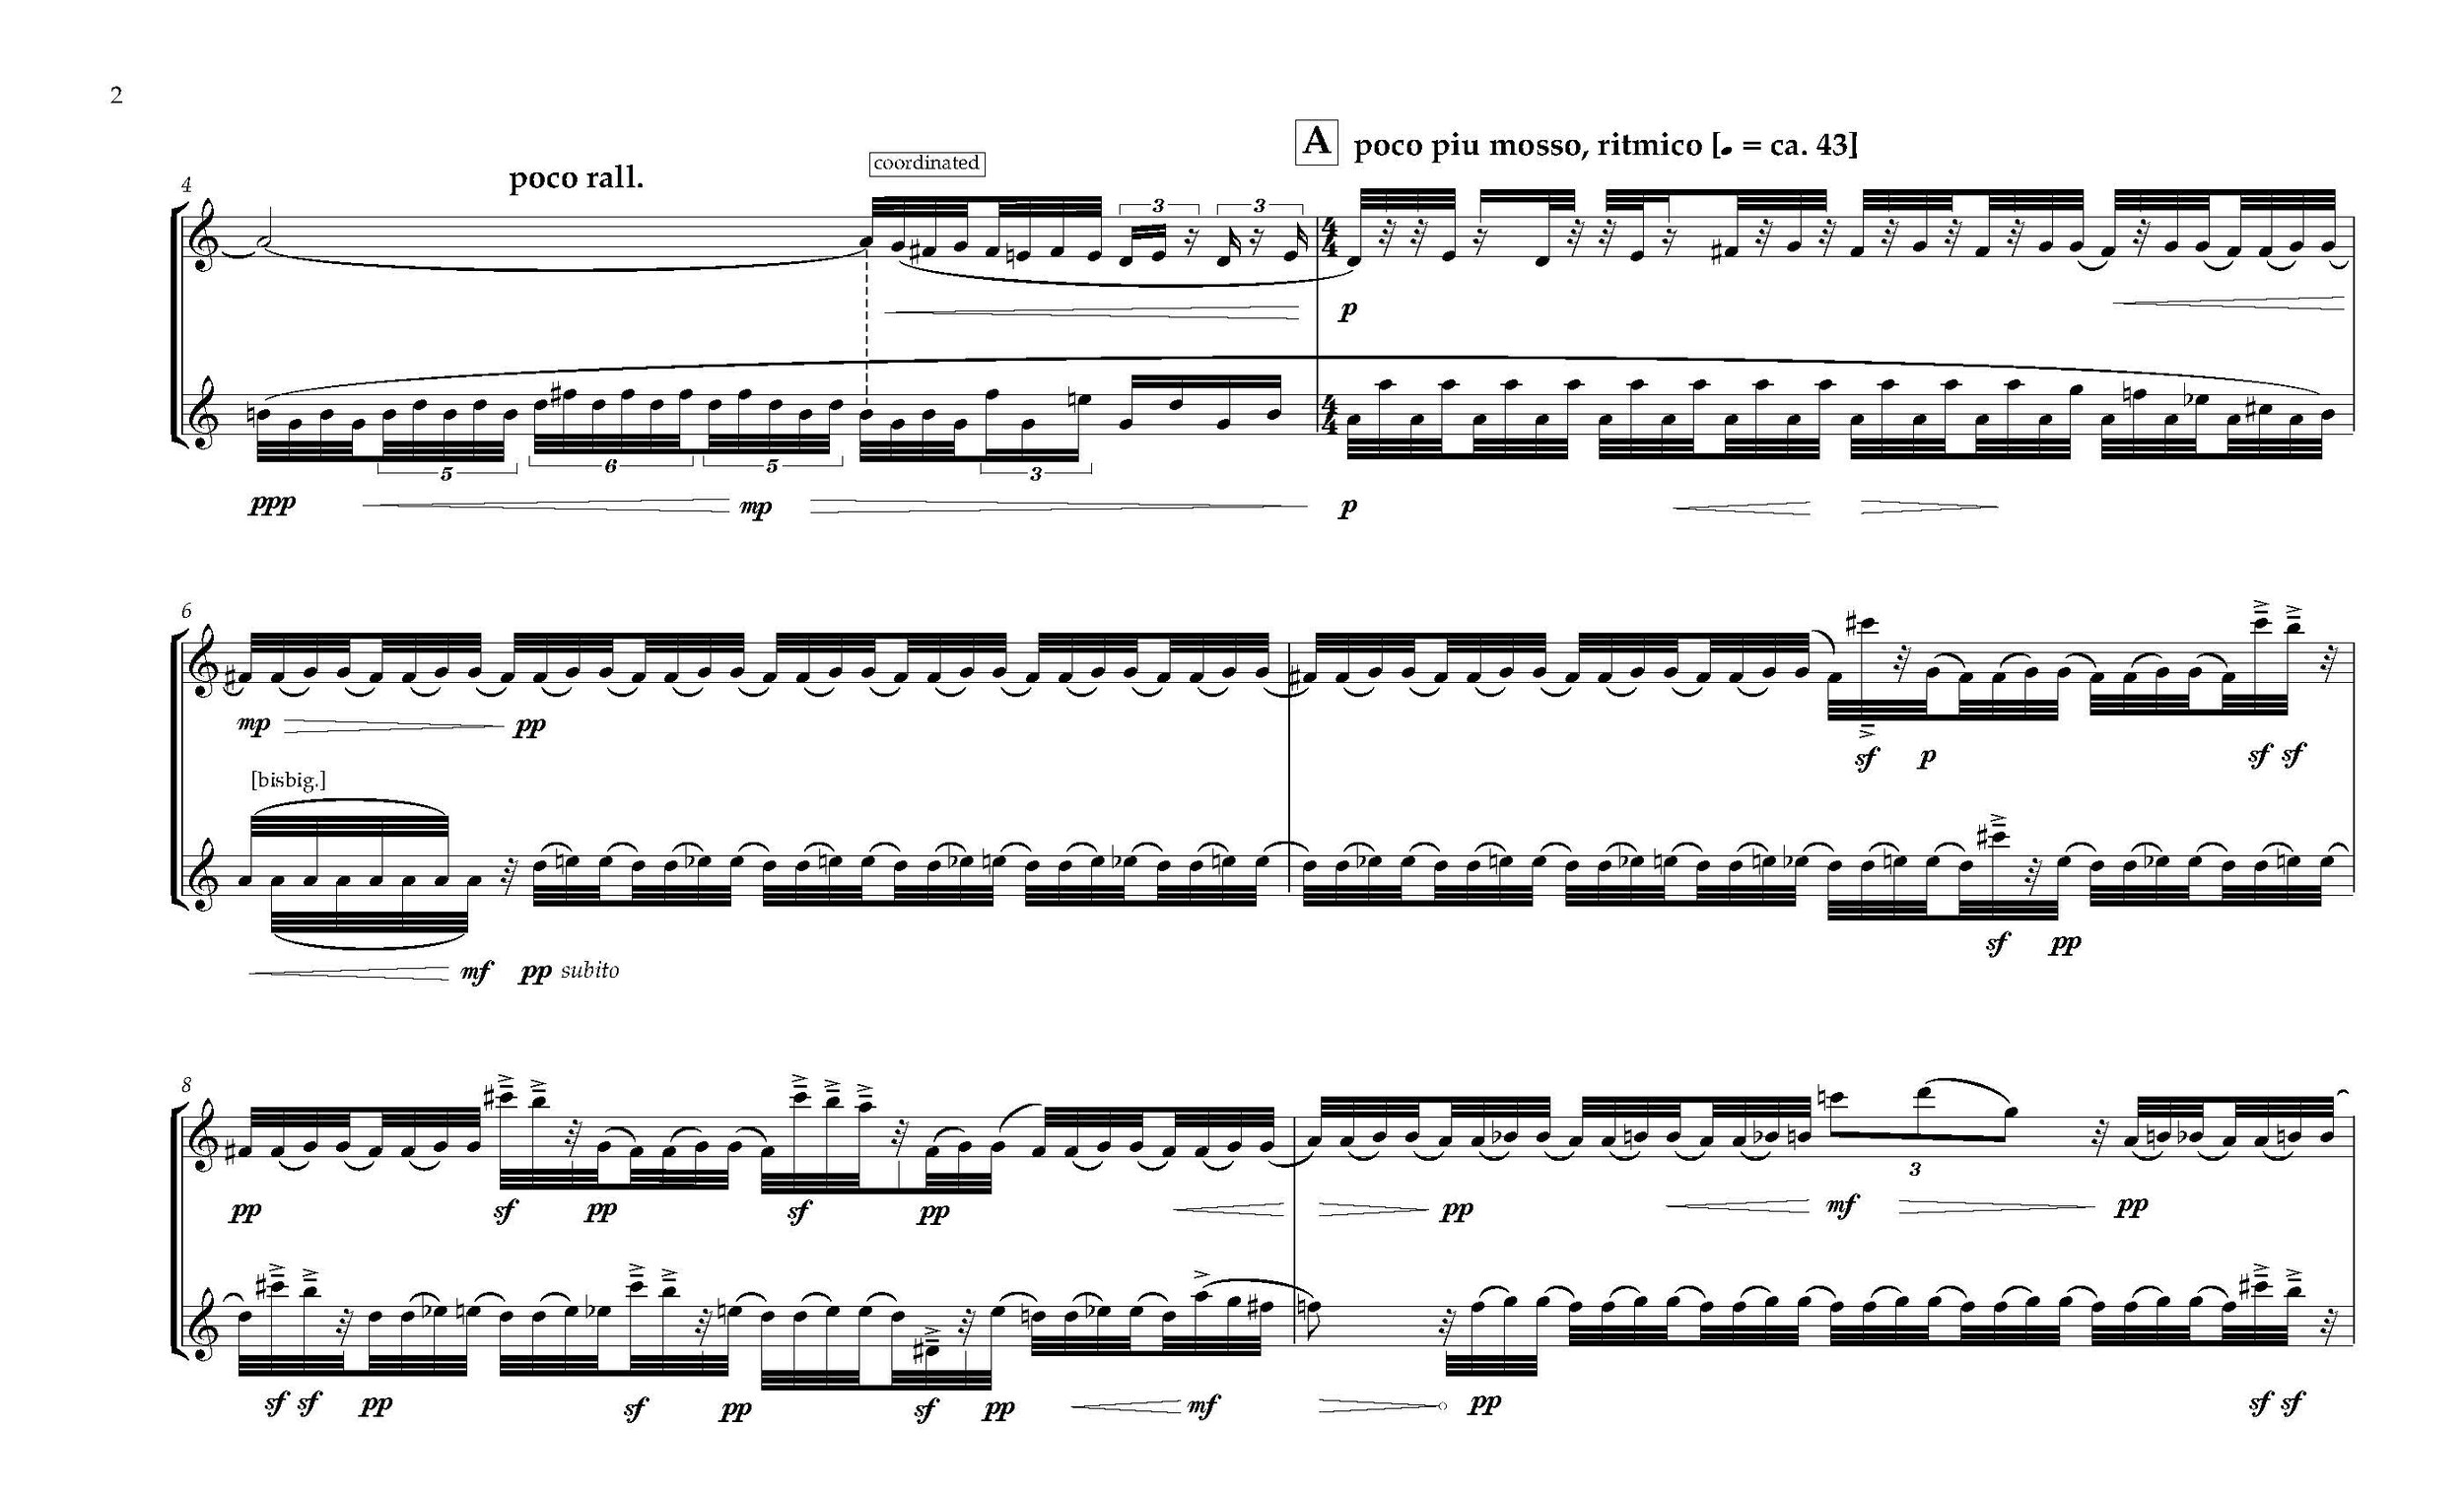 One Final Gyre - Complete Score_Page_10.jpg